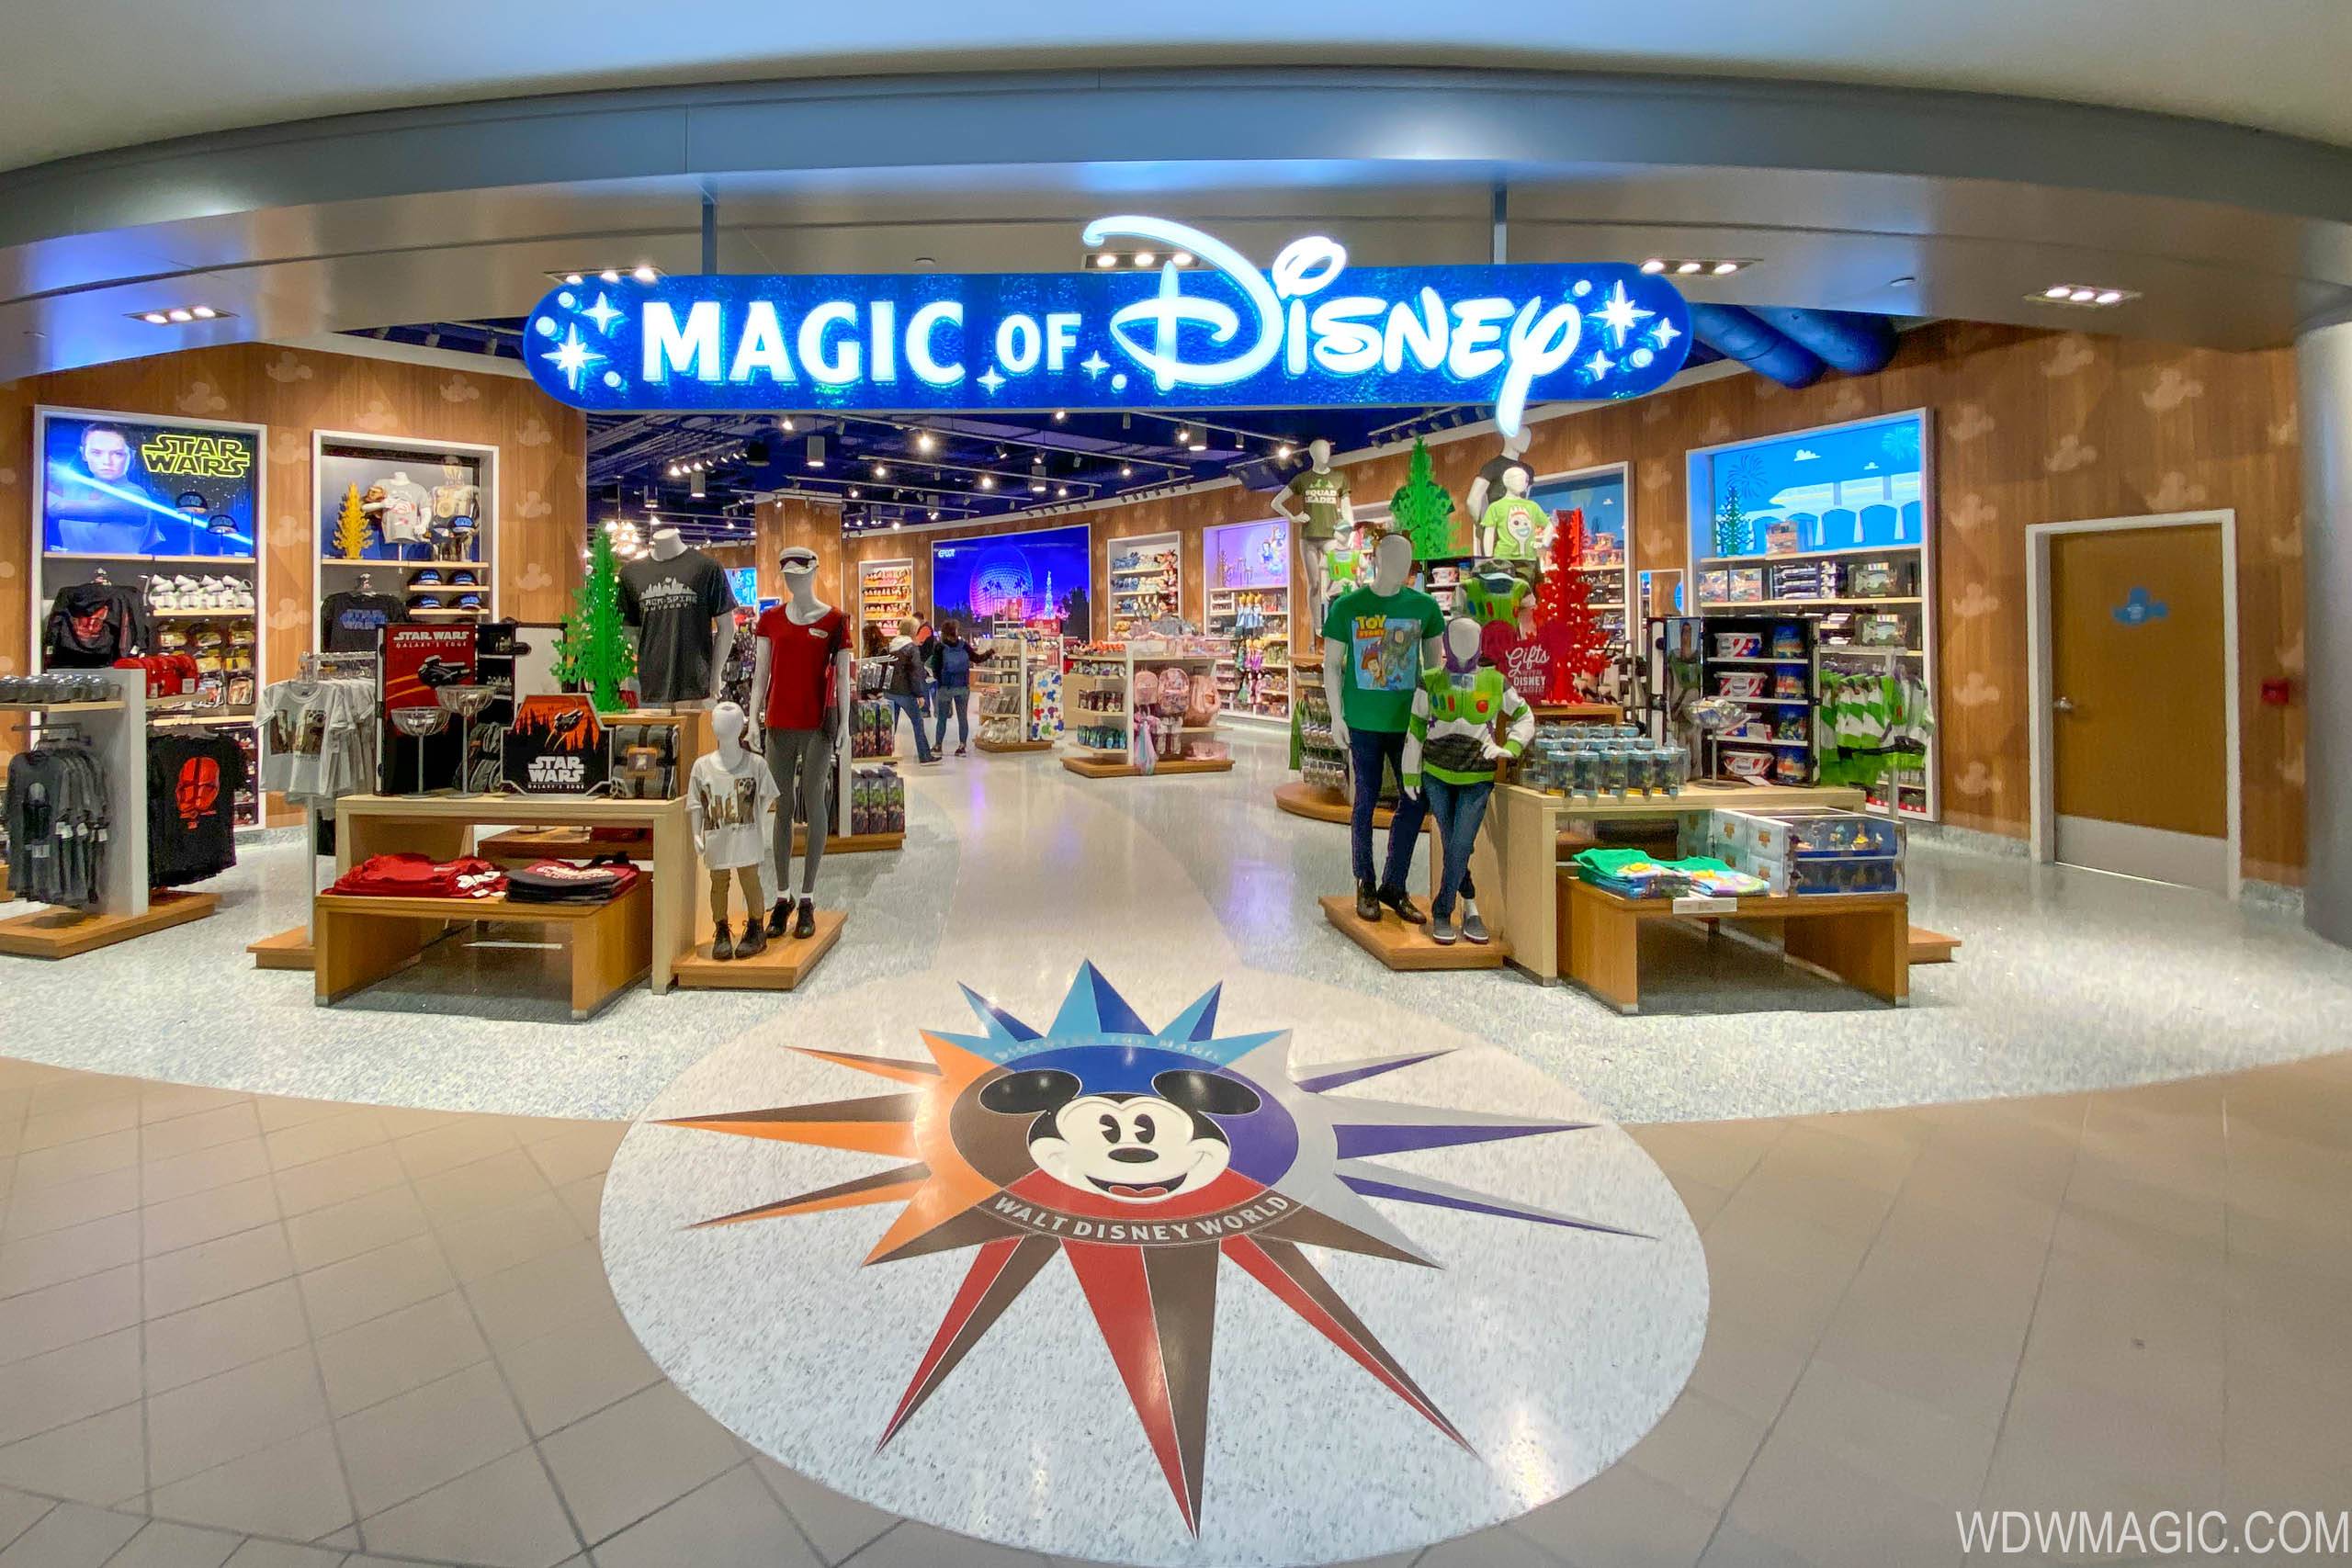 Disney already operates two Disney stores at Orlando International Airport and will add a third